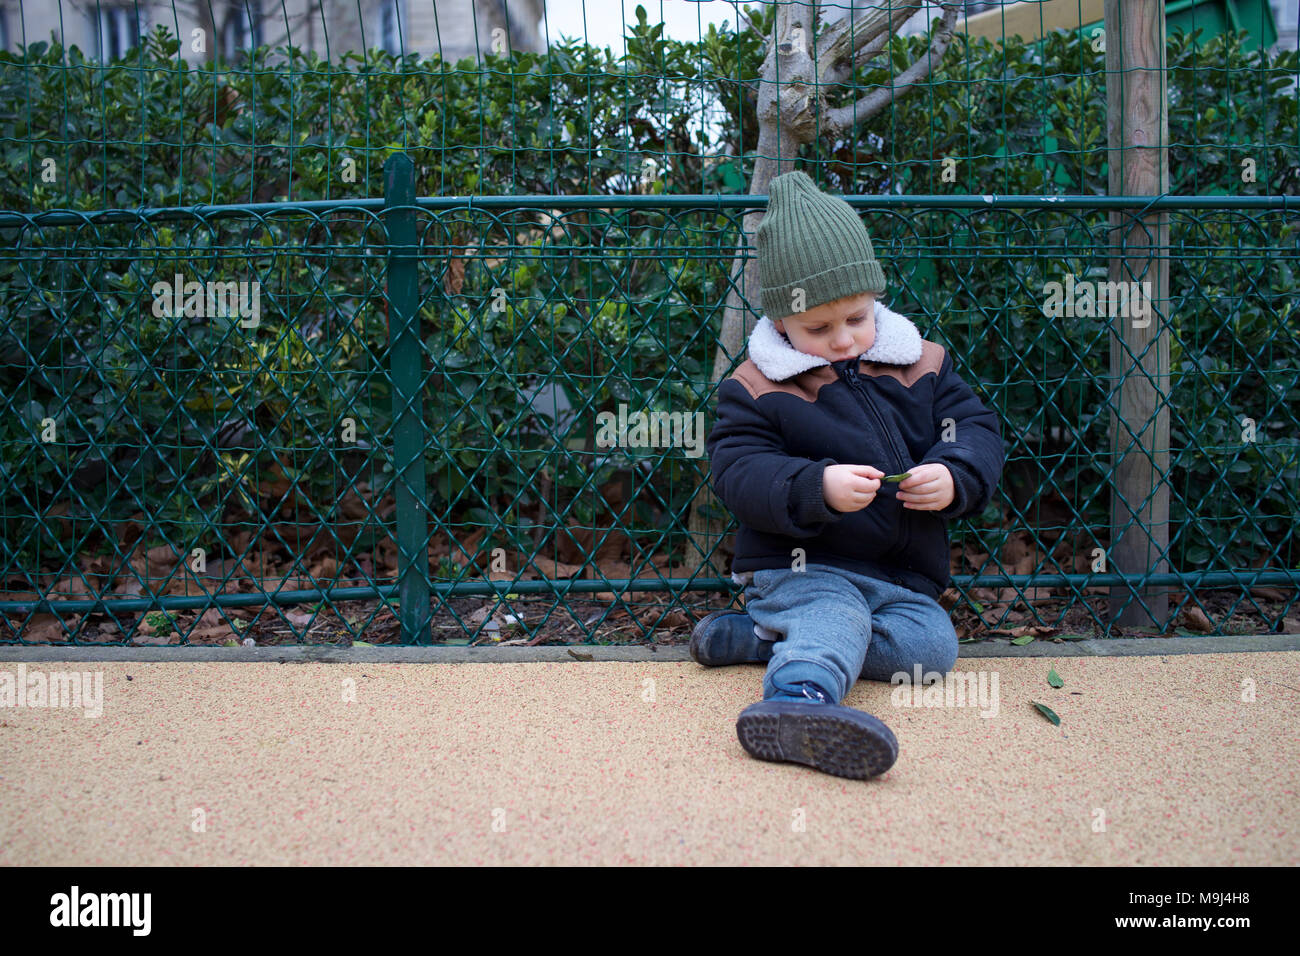 Boy sitting on floor, alone in playground, looking vulnerable Stock Photo